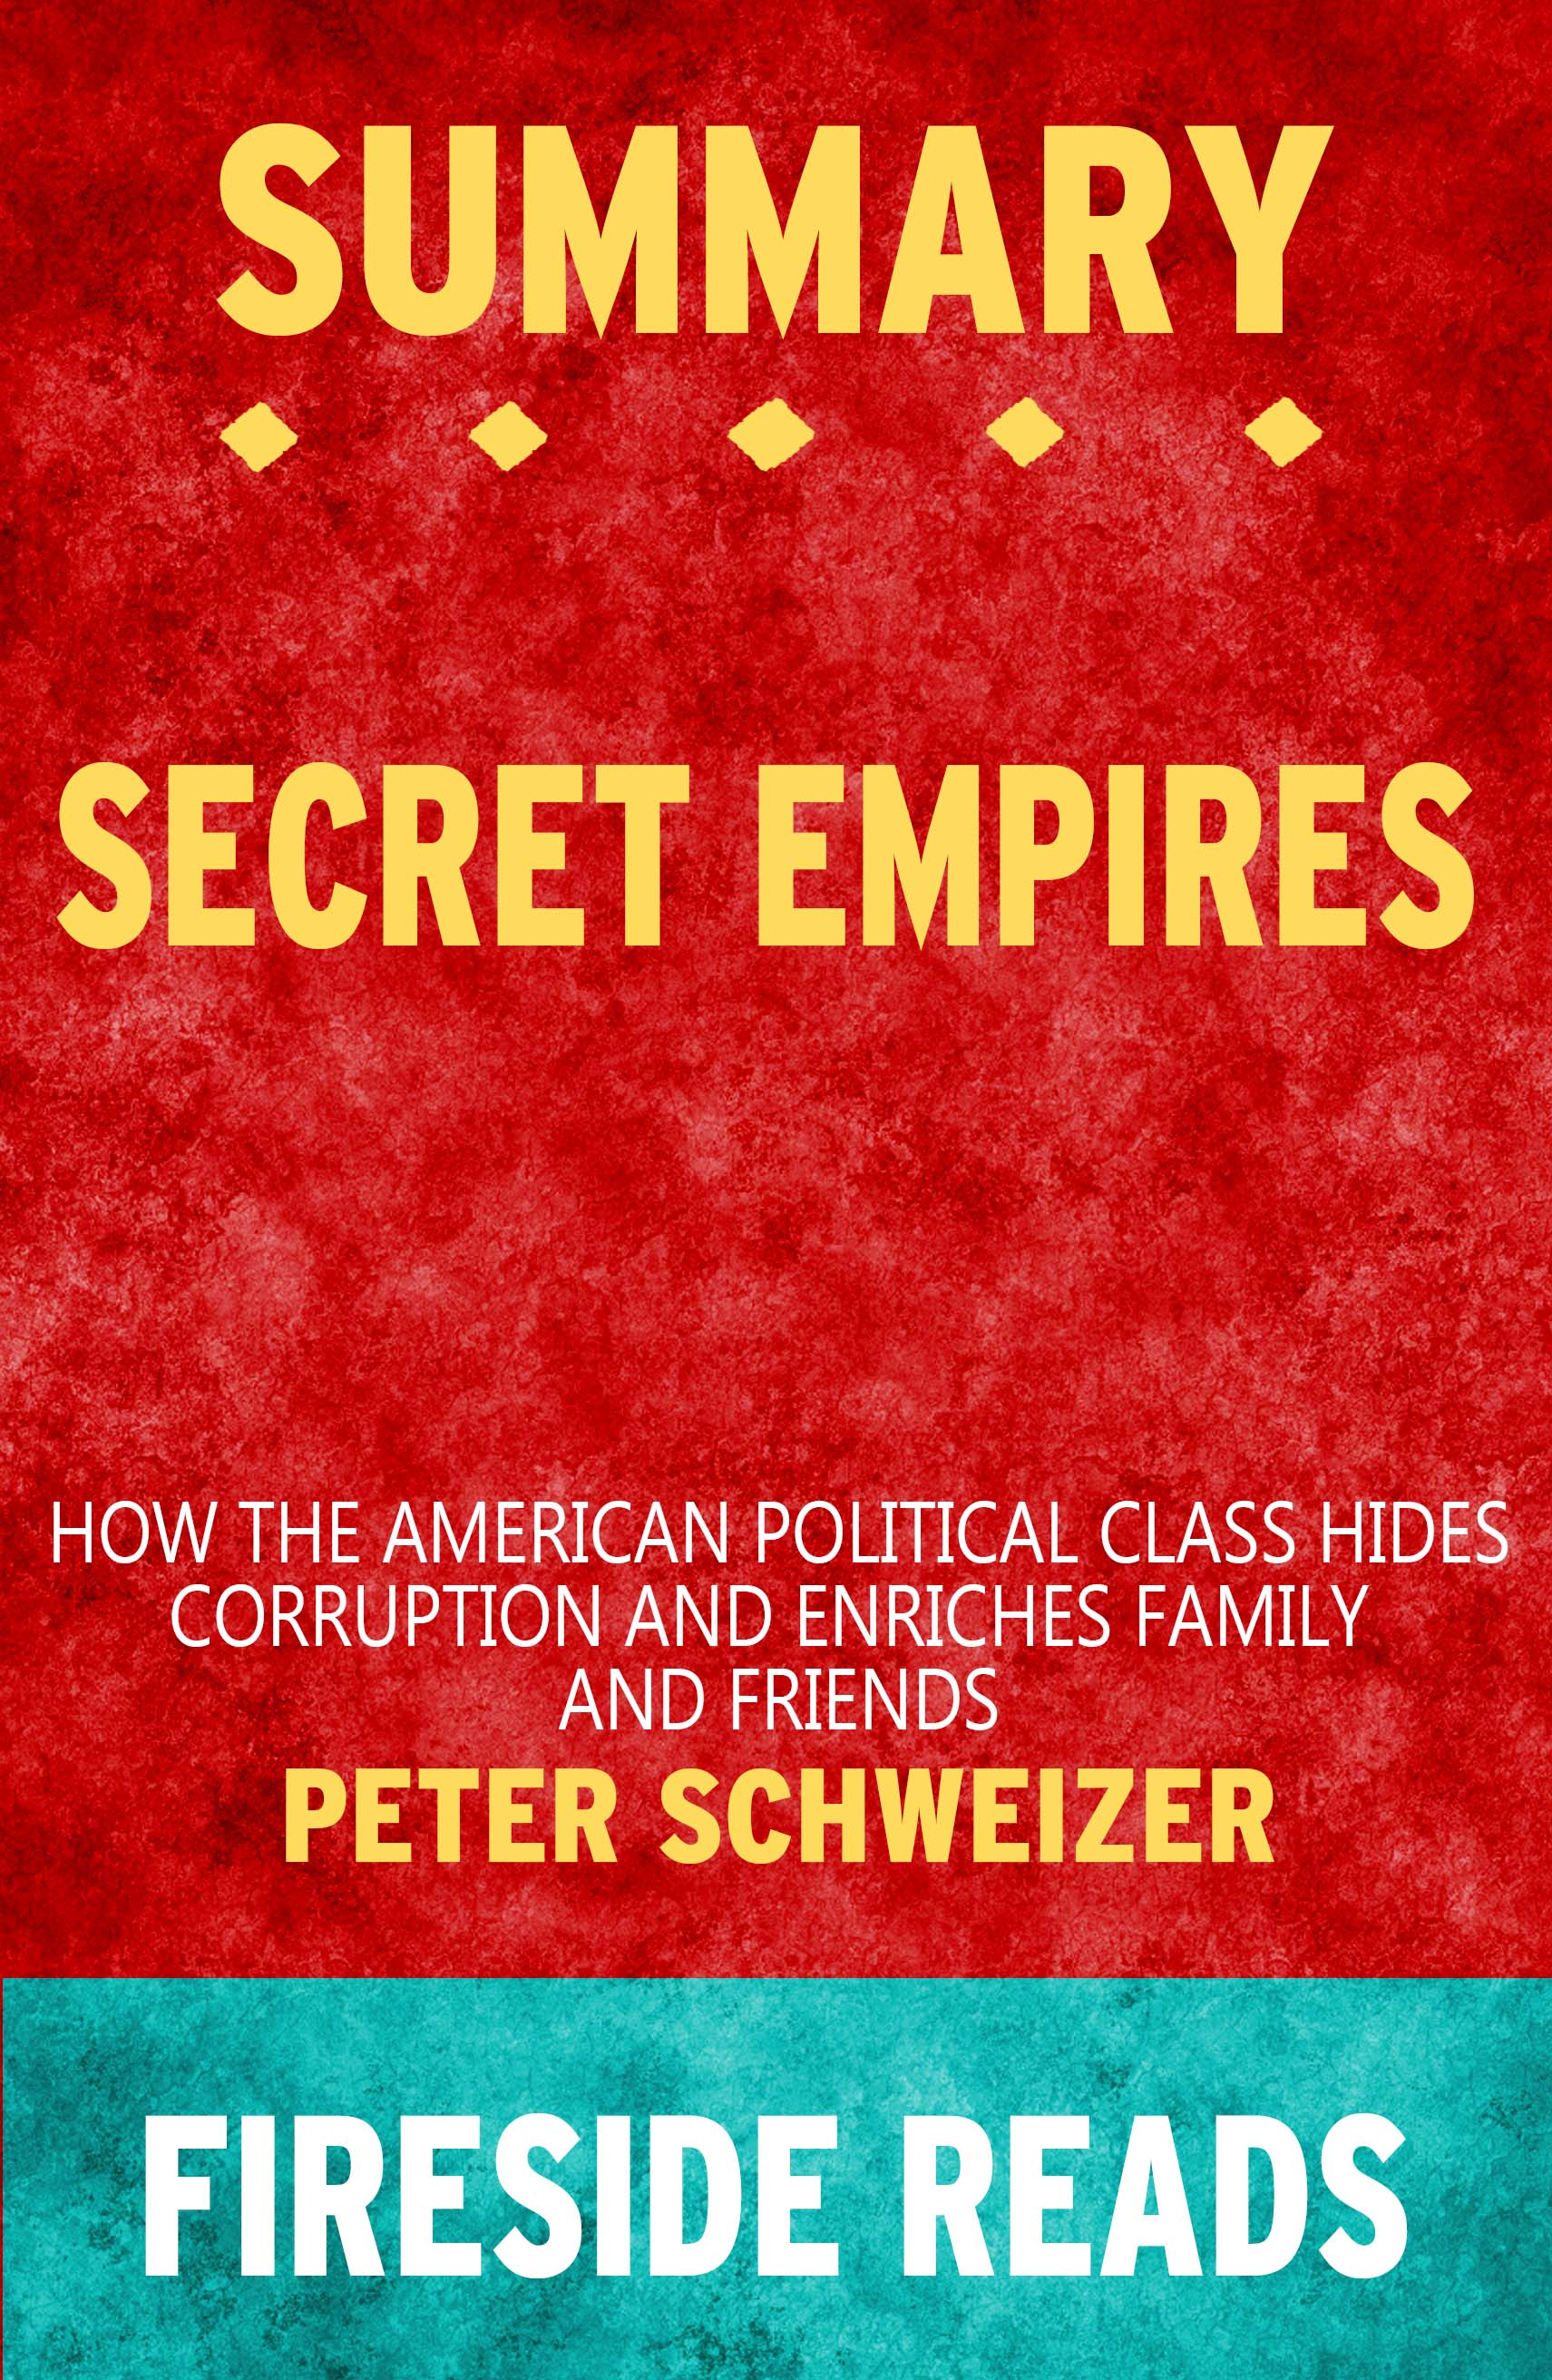 Secret Empires How the American Political Class Hides Corruption and Enriches Family and Friends